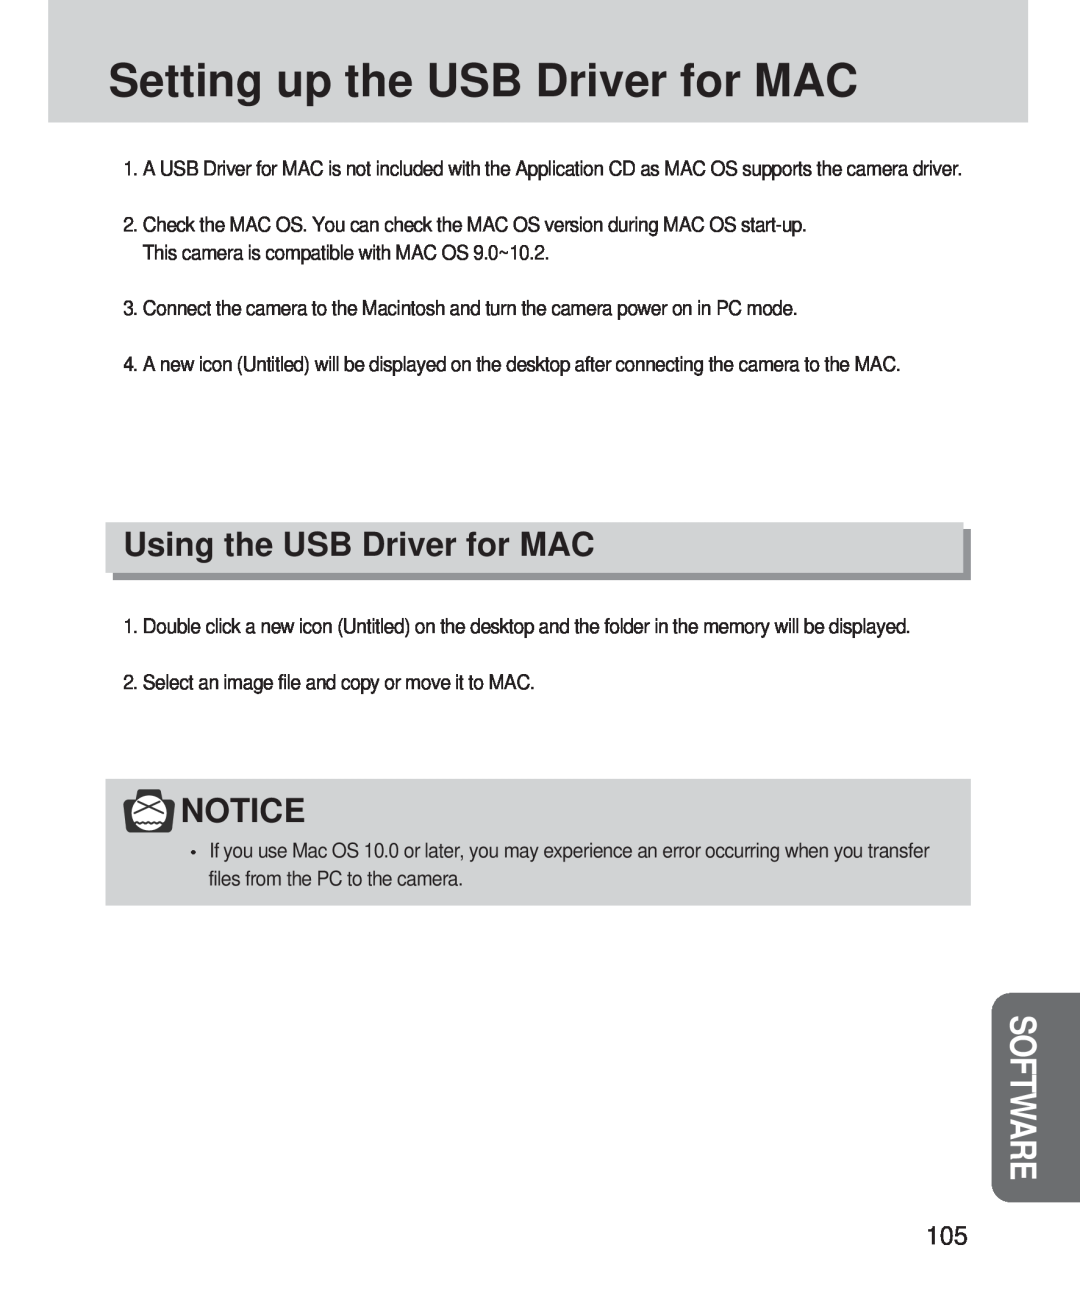 Samsung 420 manual Setting up the USB Driver for MAC, Using the USB Driver for MAC, Software 